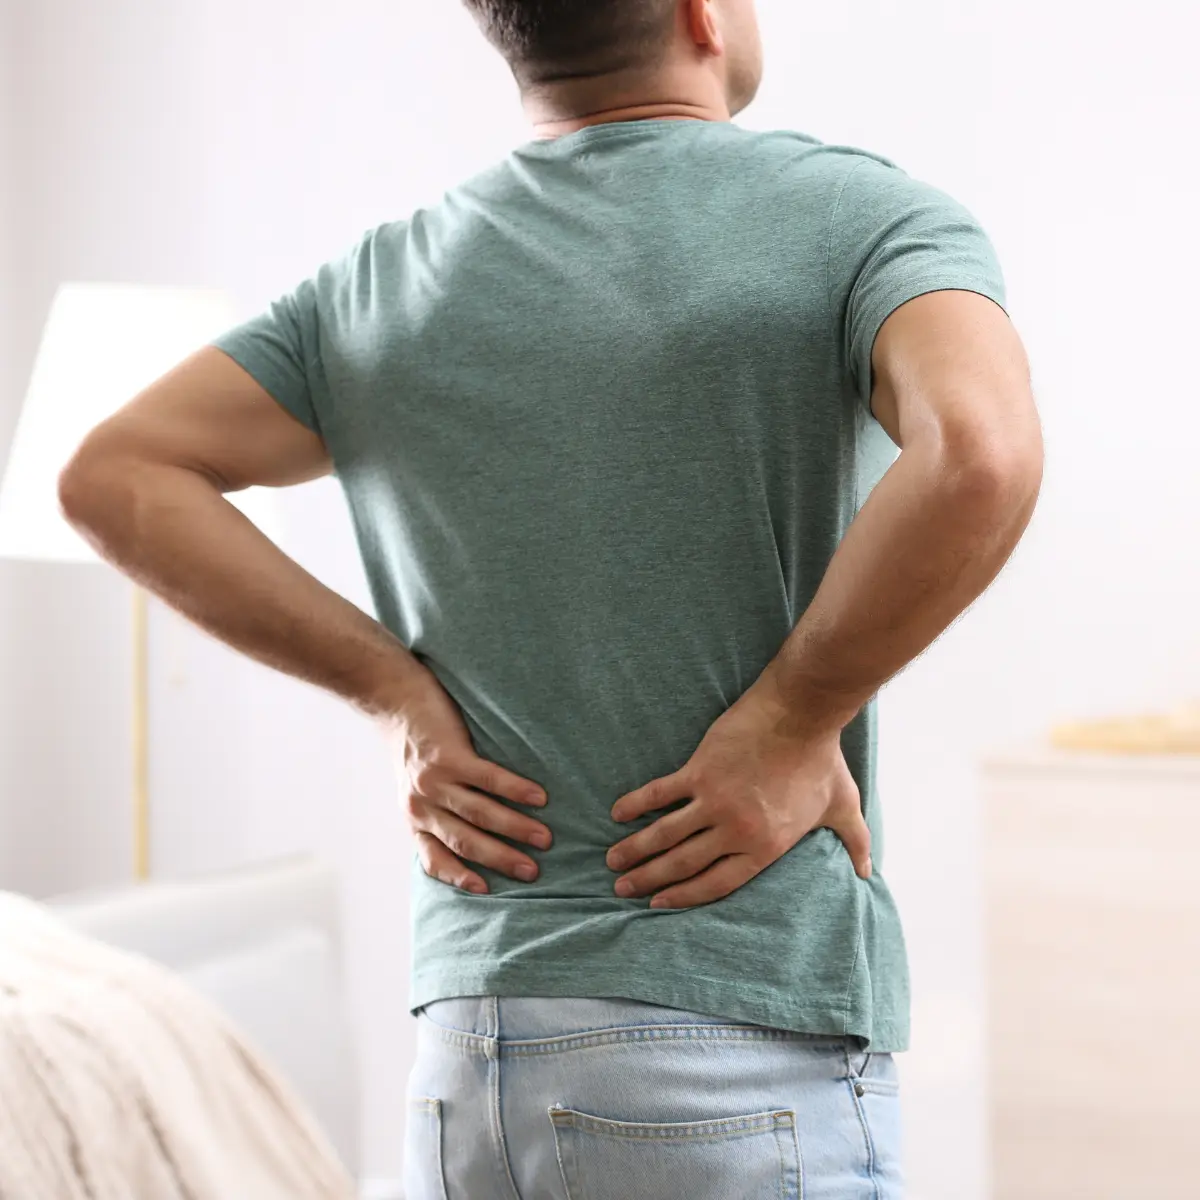 Best Lower Back Pain Treatment in Clifton, NJ